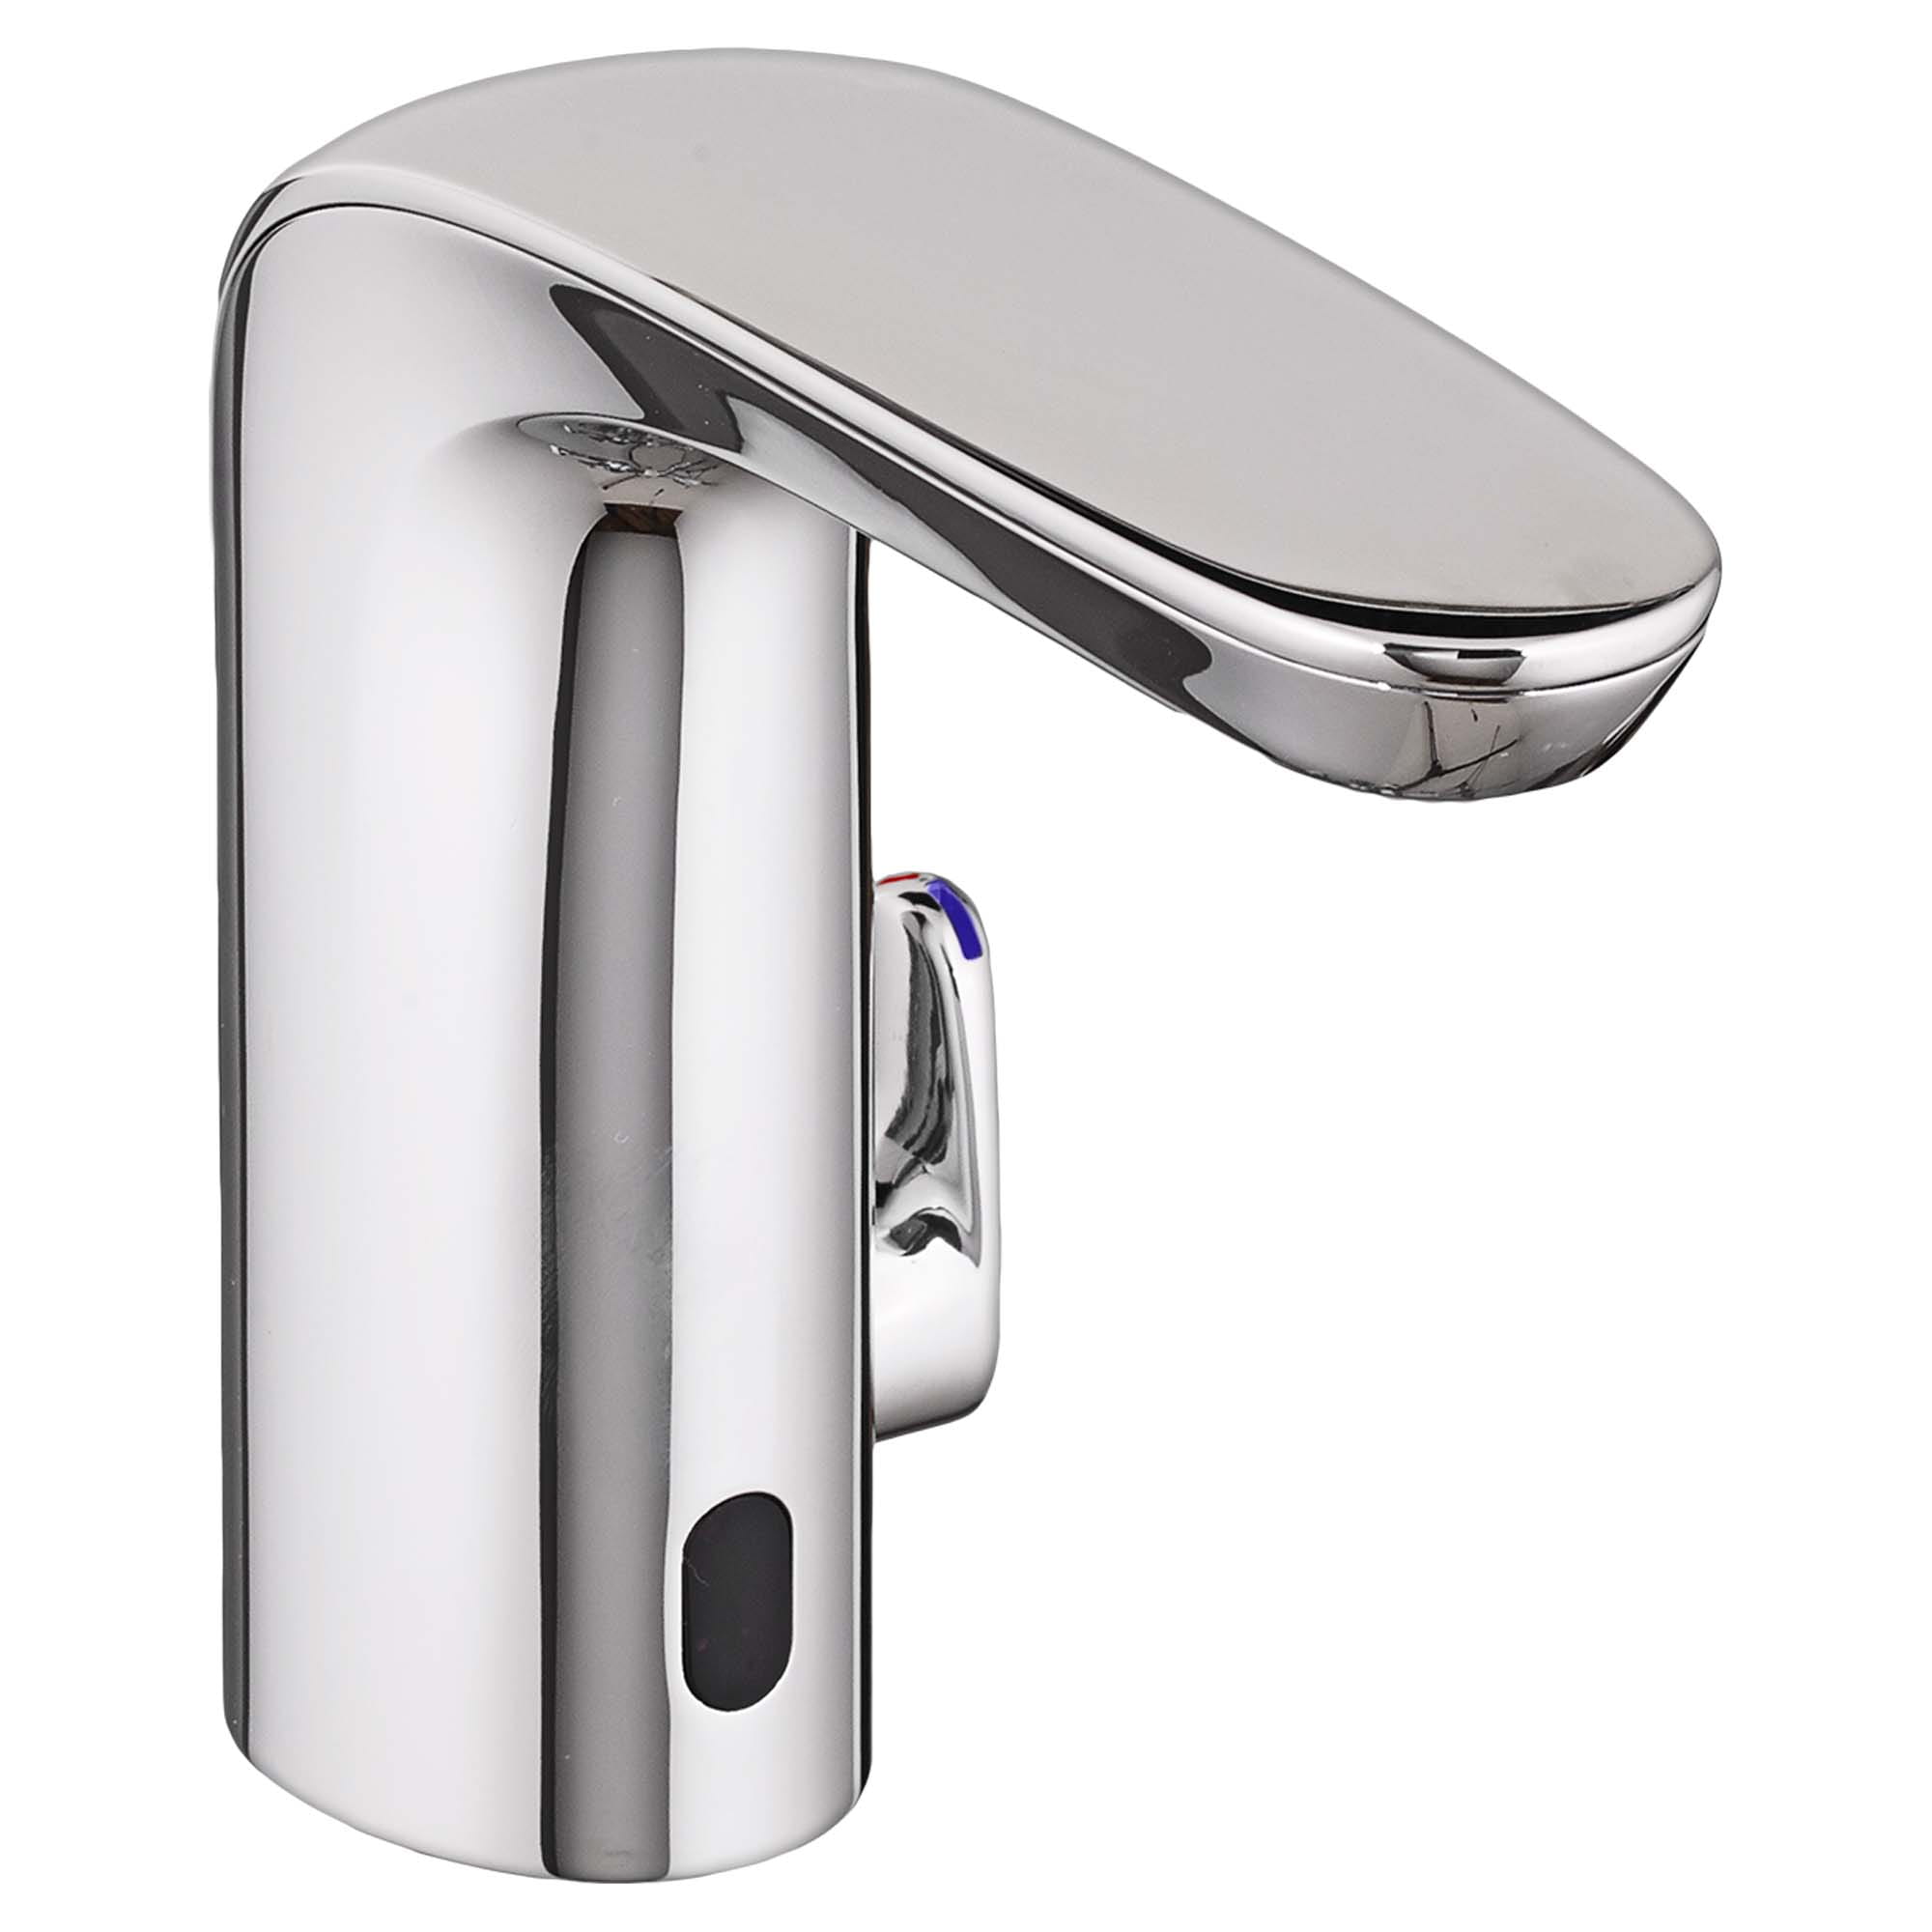 NextGen™ Selectronic® Touchless Faucet, Base Model With Above-Deck Mixing,, 0.5 gpm/1.9 Lpm